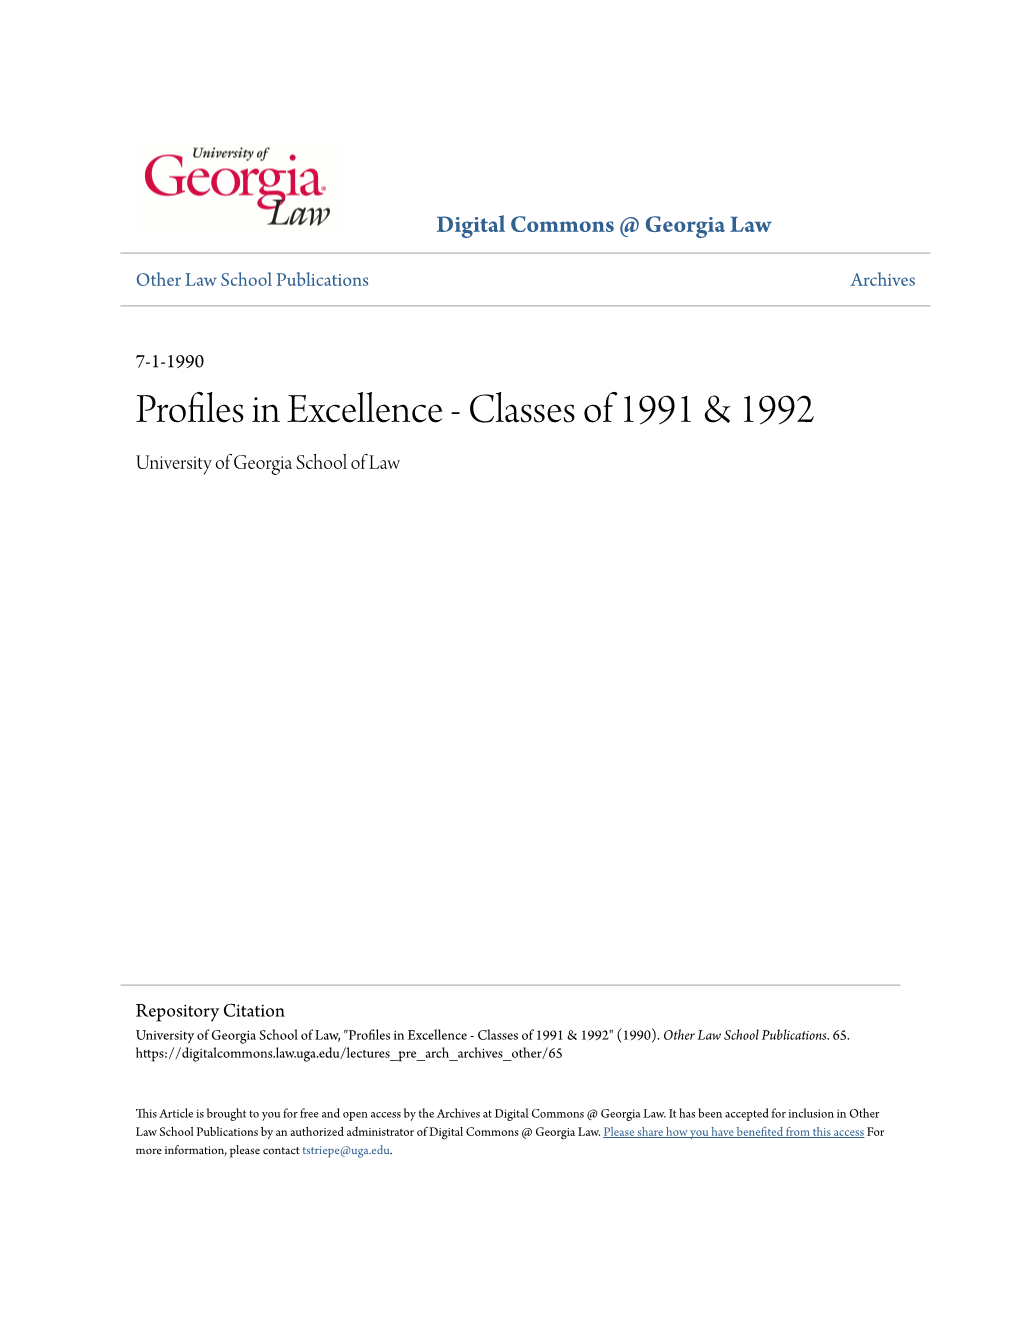 Profiles in Excellence - Classes of 1991 & 1992 University of Georgia School of Law